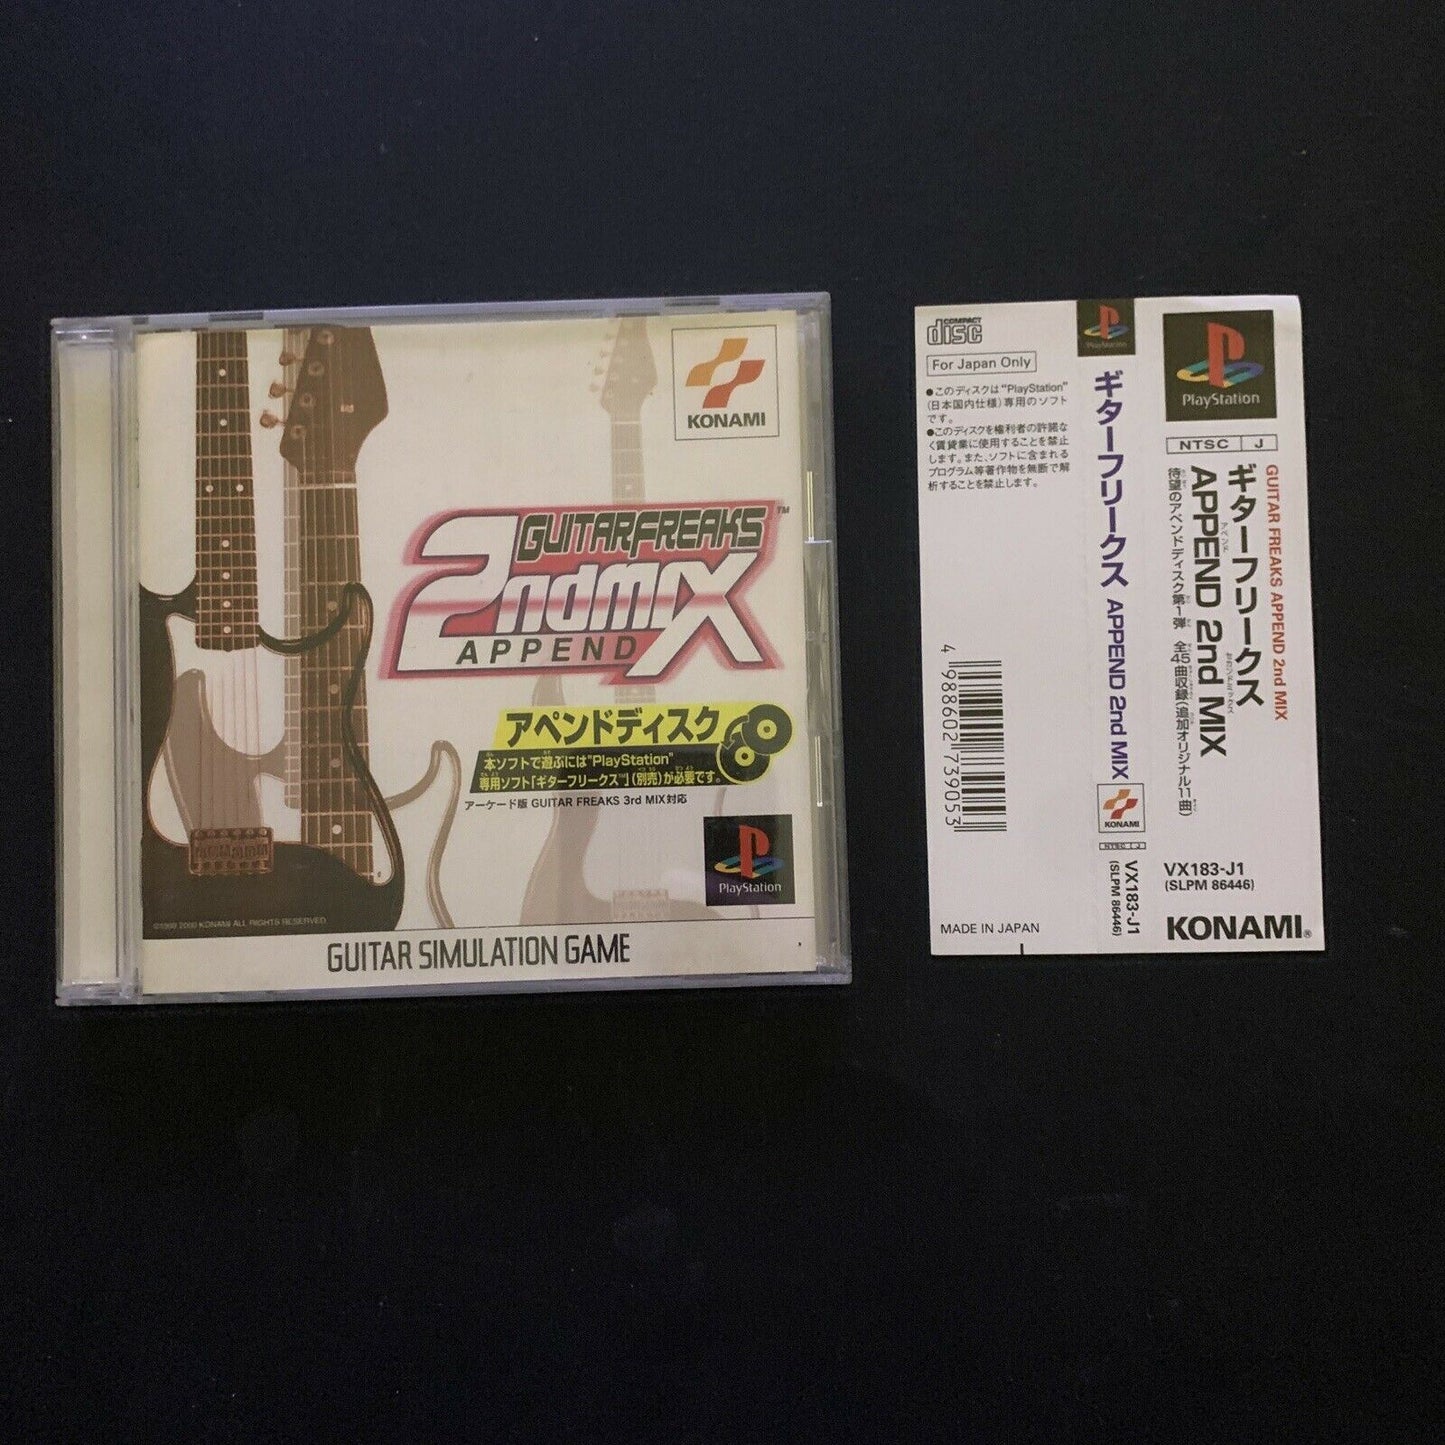 Guitar Freaks: Append 2nd Mix - Playstation PS1 NTSC-J Japan Game